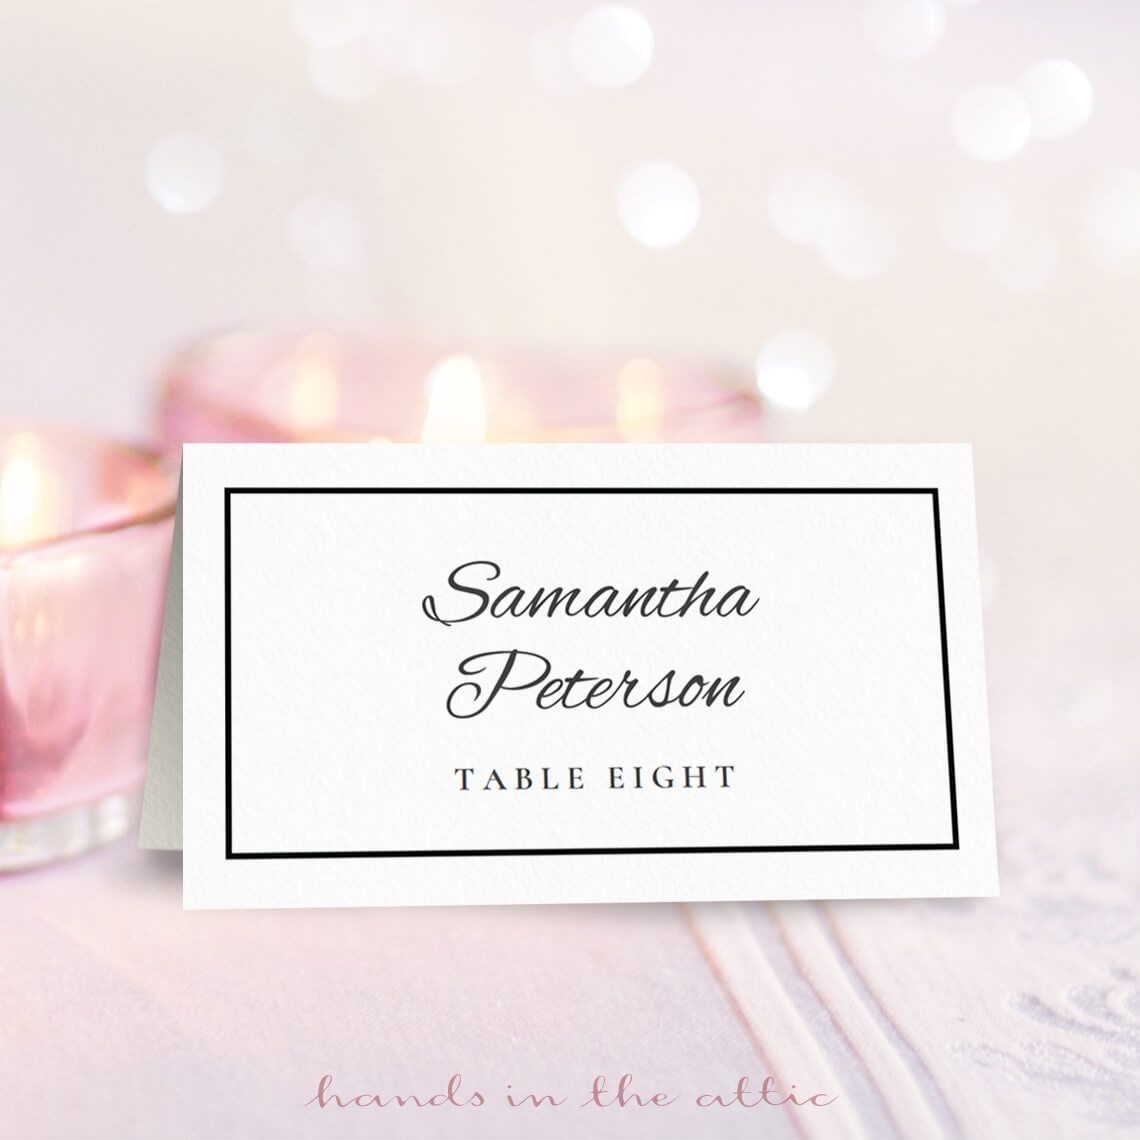 Wedding Place Card Template | Free On Handsintheattic | Free - Free Printable Damask Place Cards